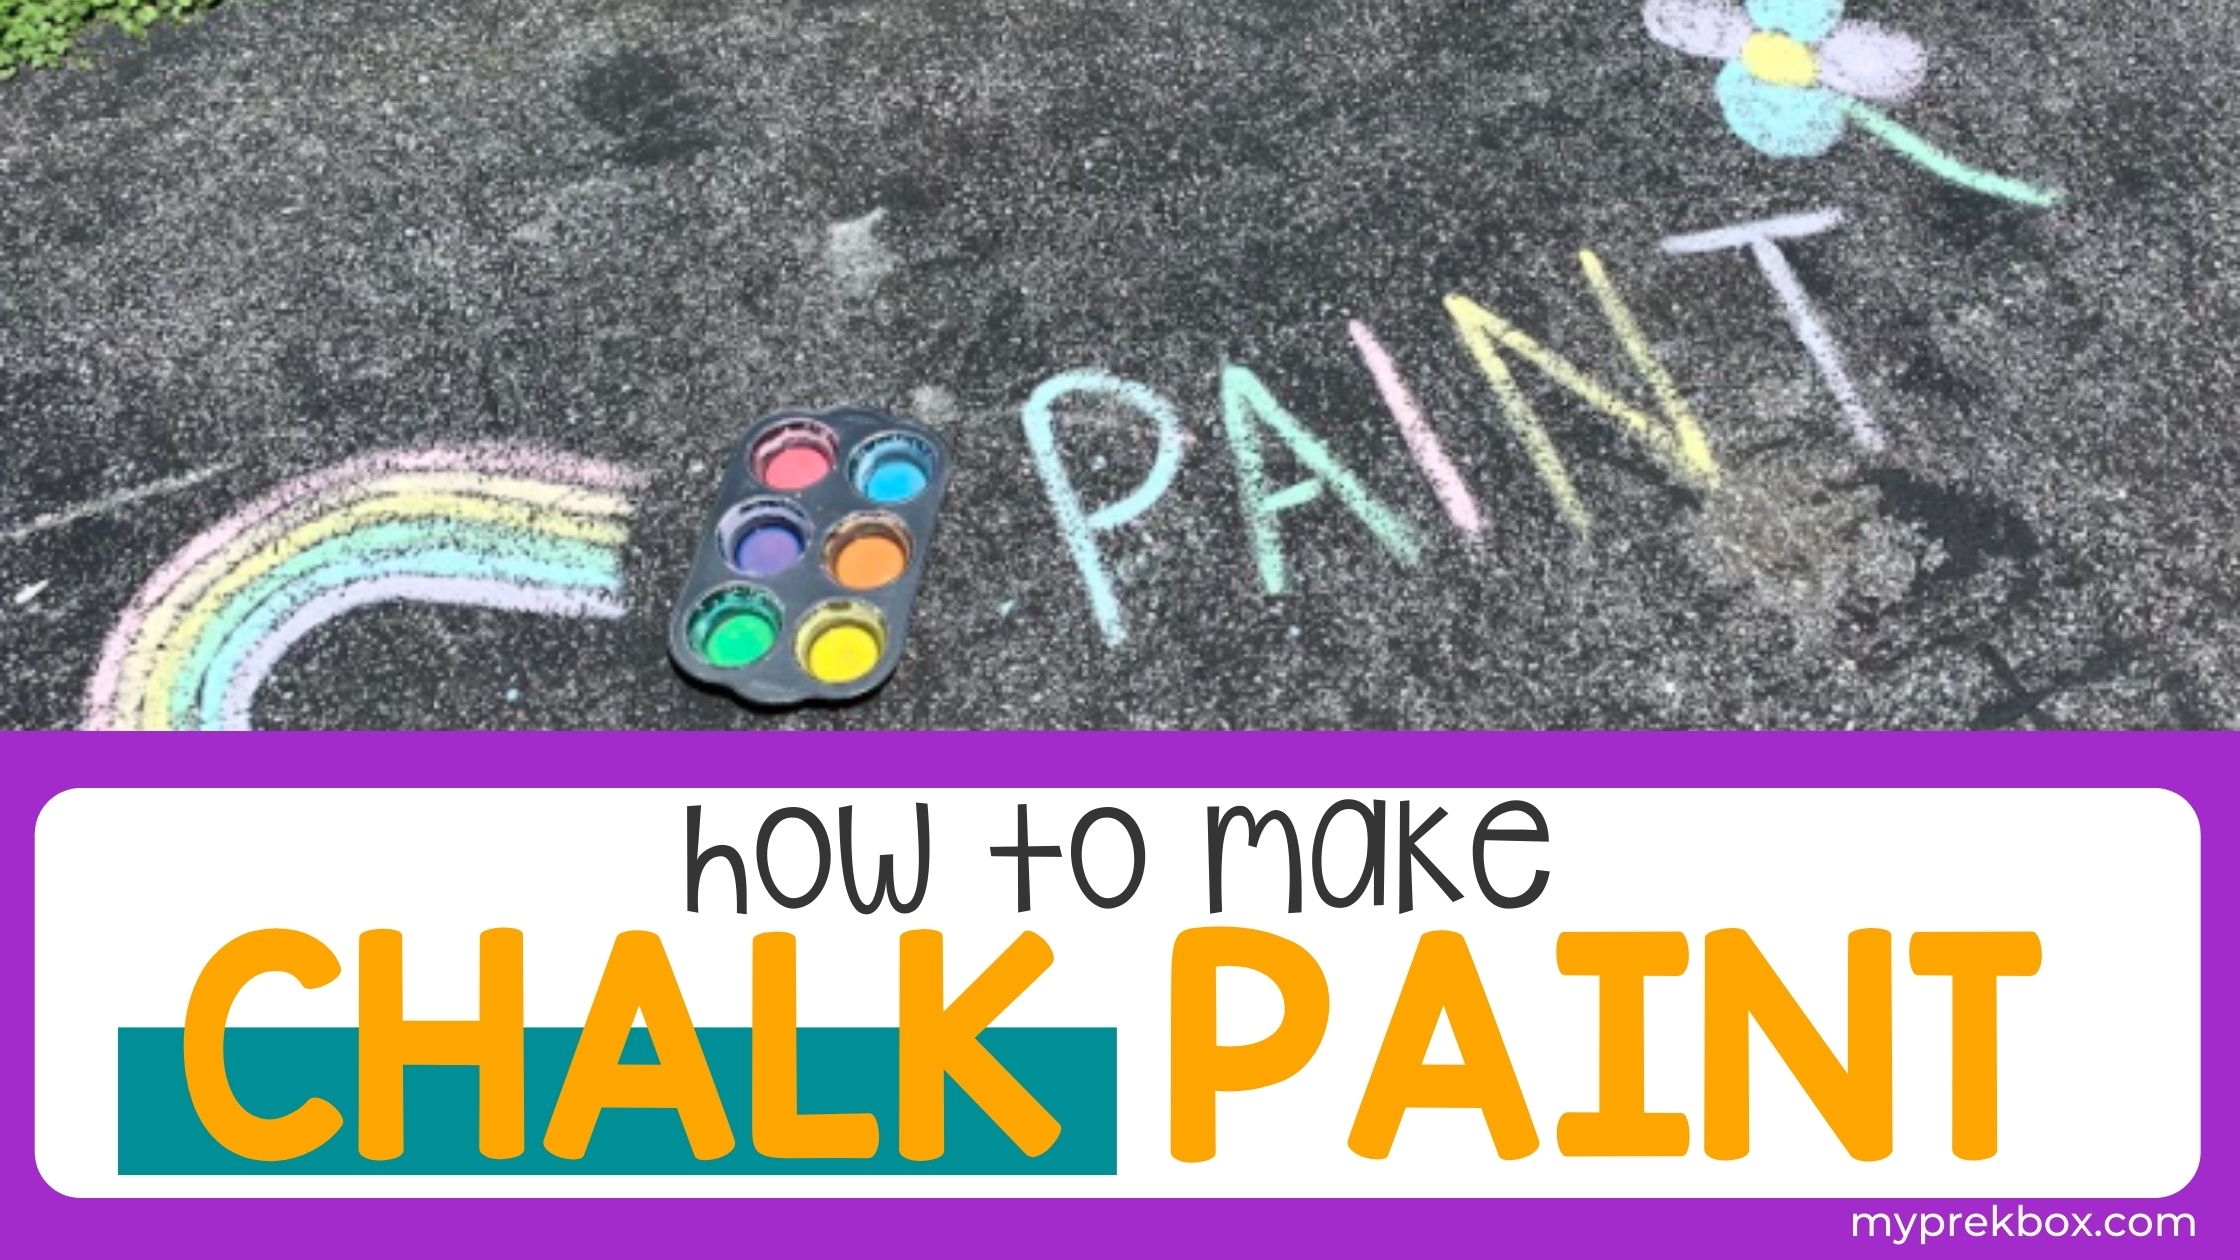 DIY Sidewalk Chalk Paint With Ingredients You Already Have at Home